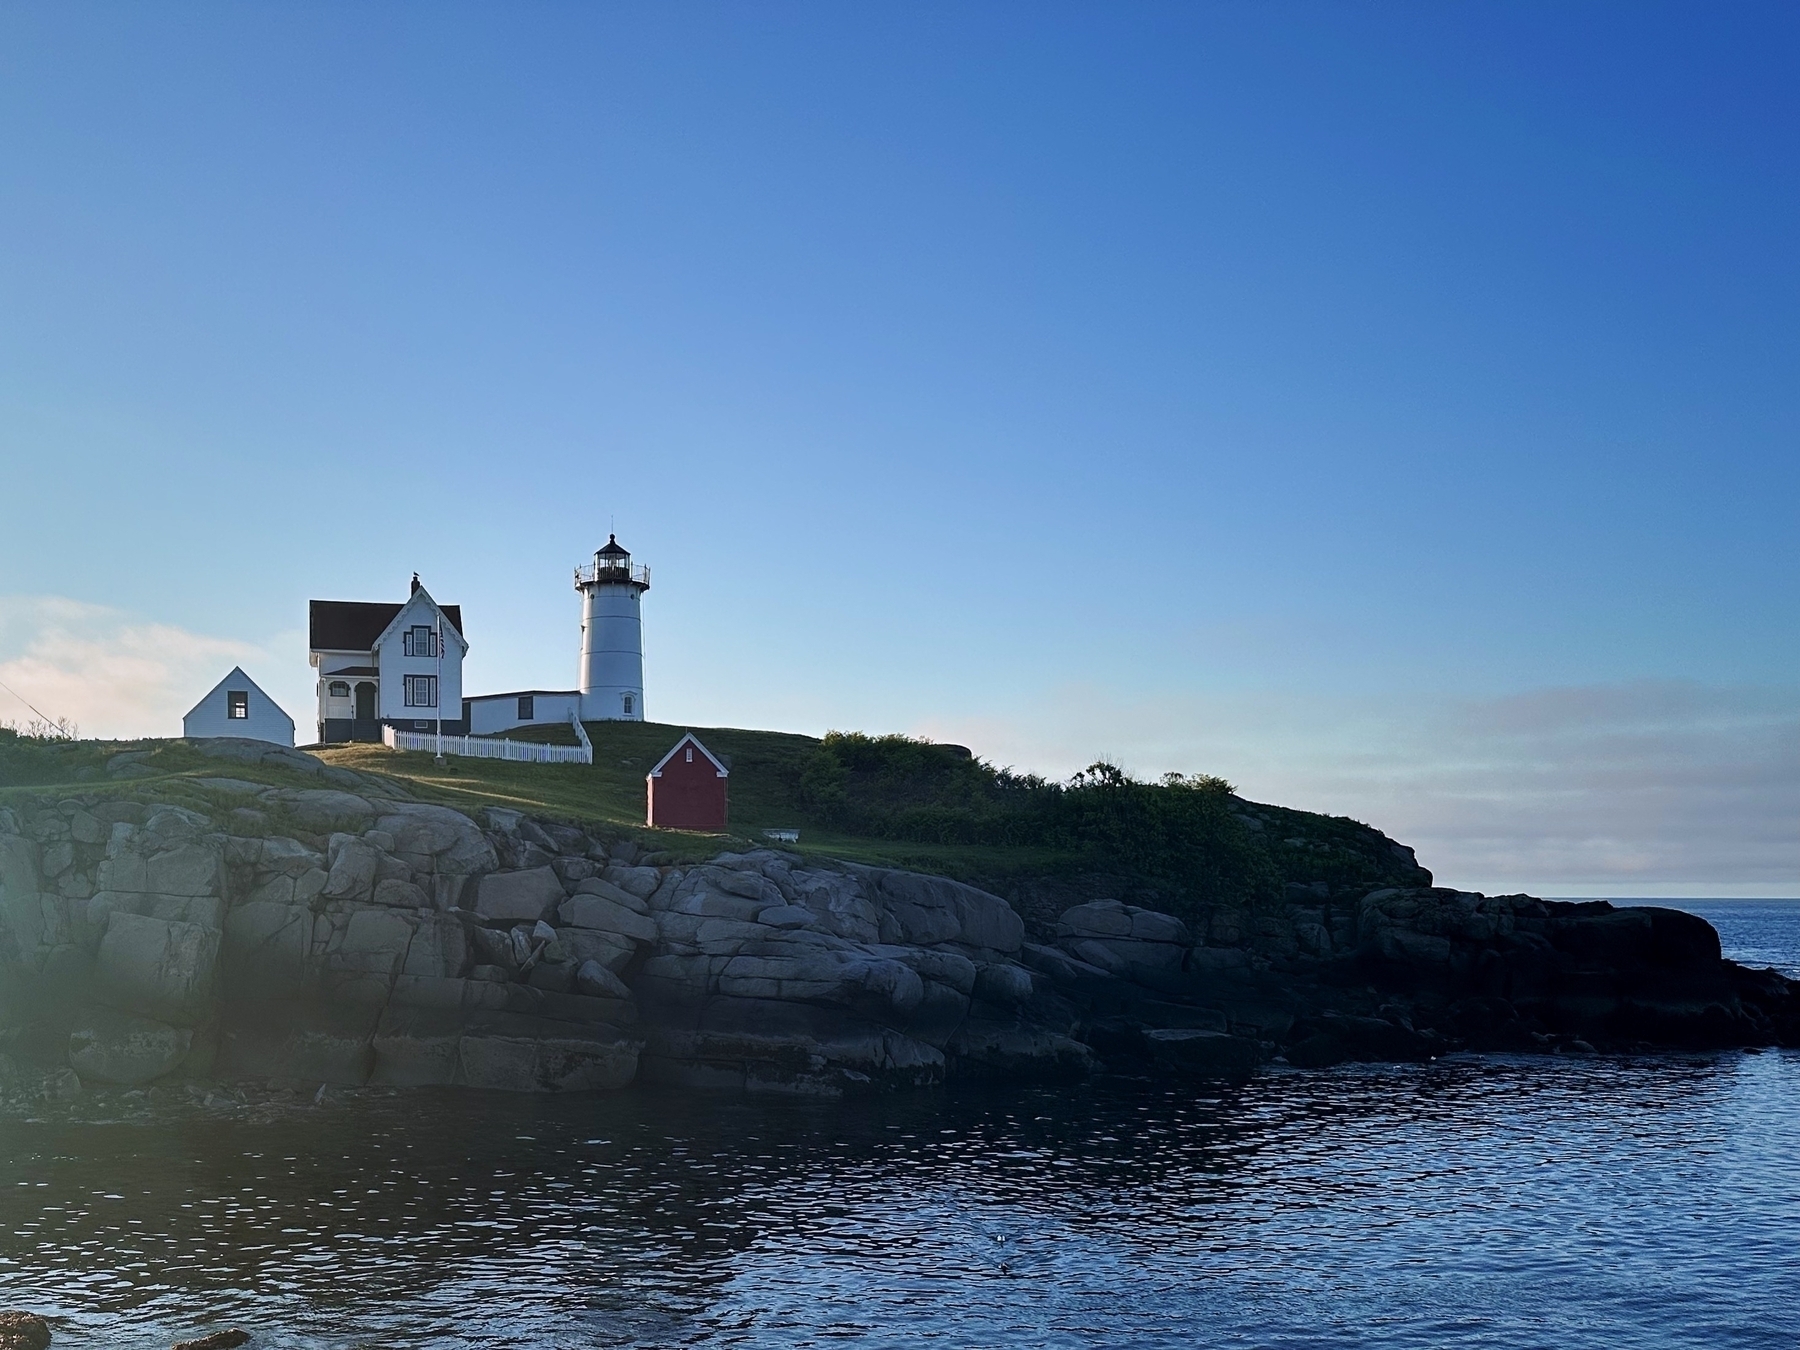 A lighthouse with an attached house and outbuildings stands on a rocky cliff overlooking a calm ocean under a clear blue sky.